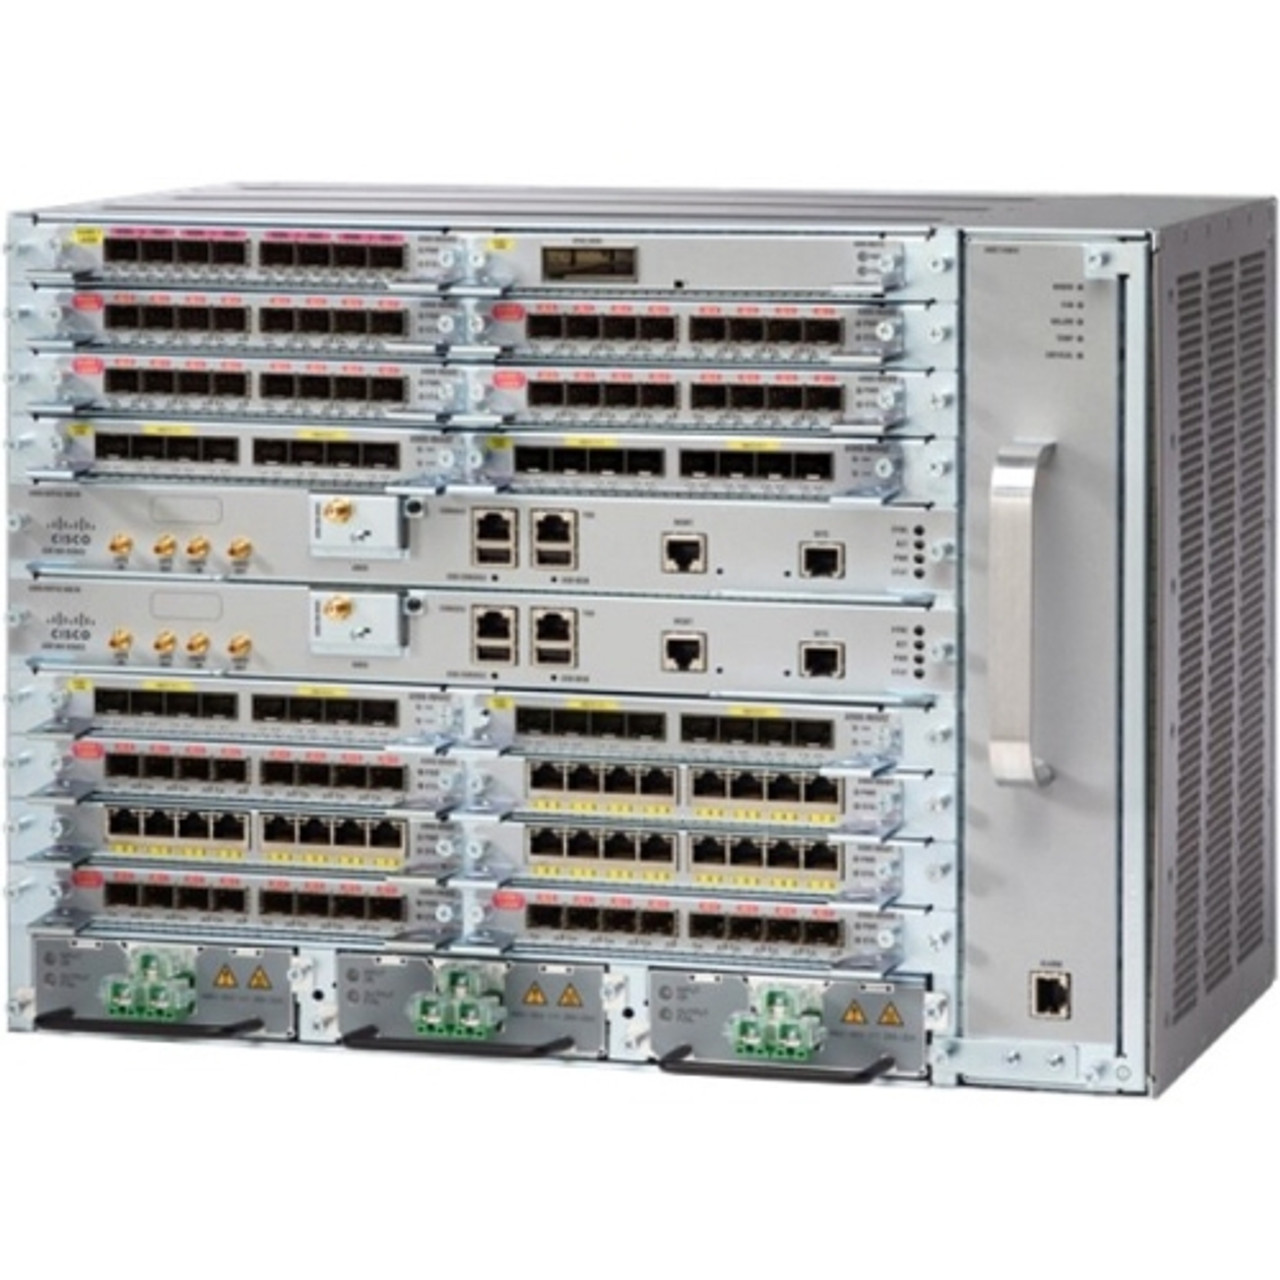 ASR-907 Cisco ASR 907 Router Chassis (Refurbished)